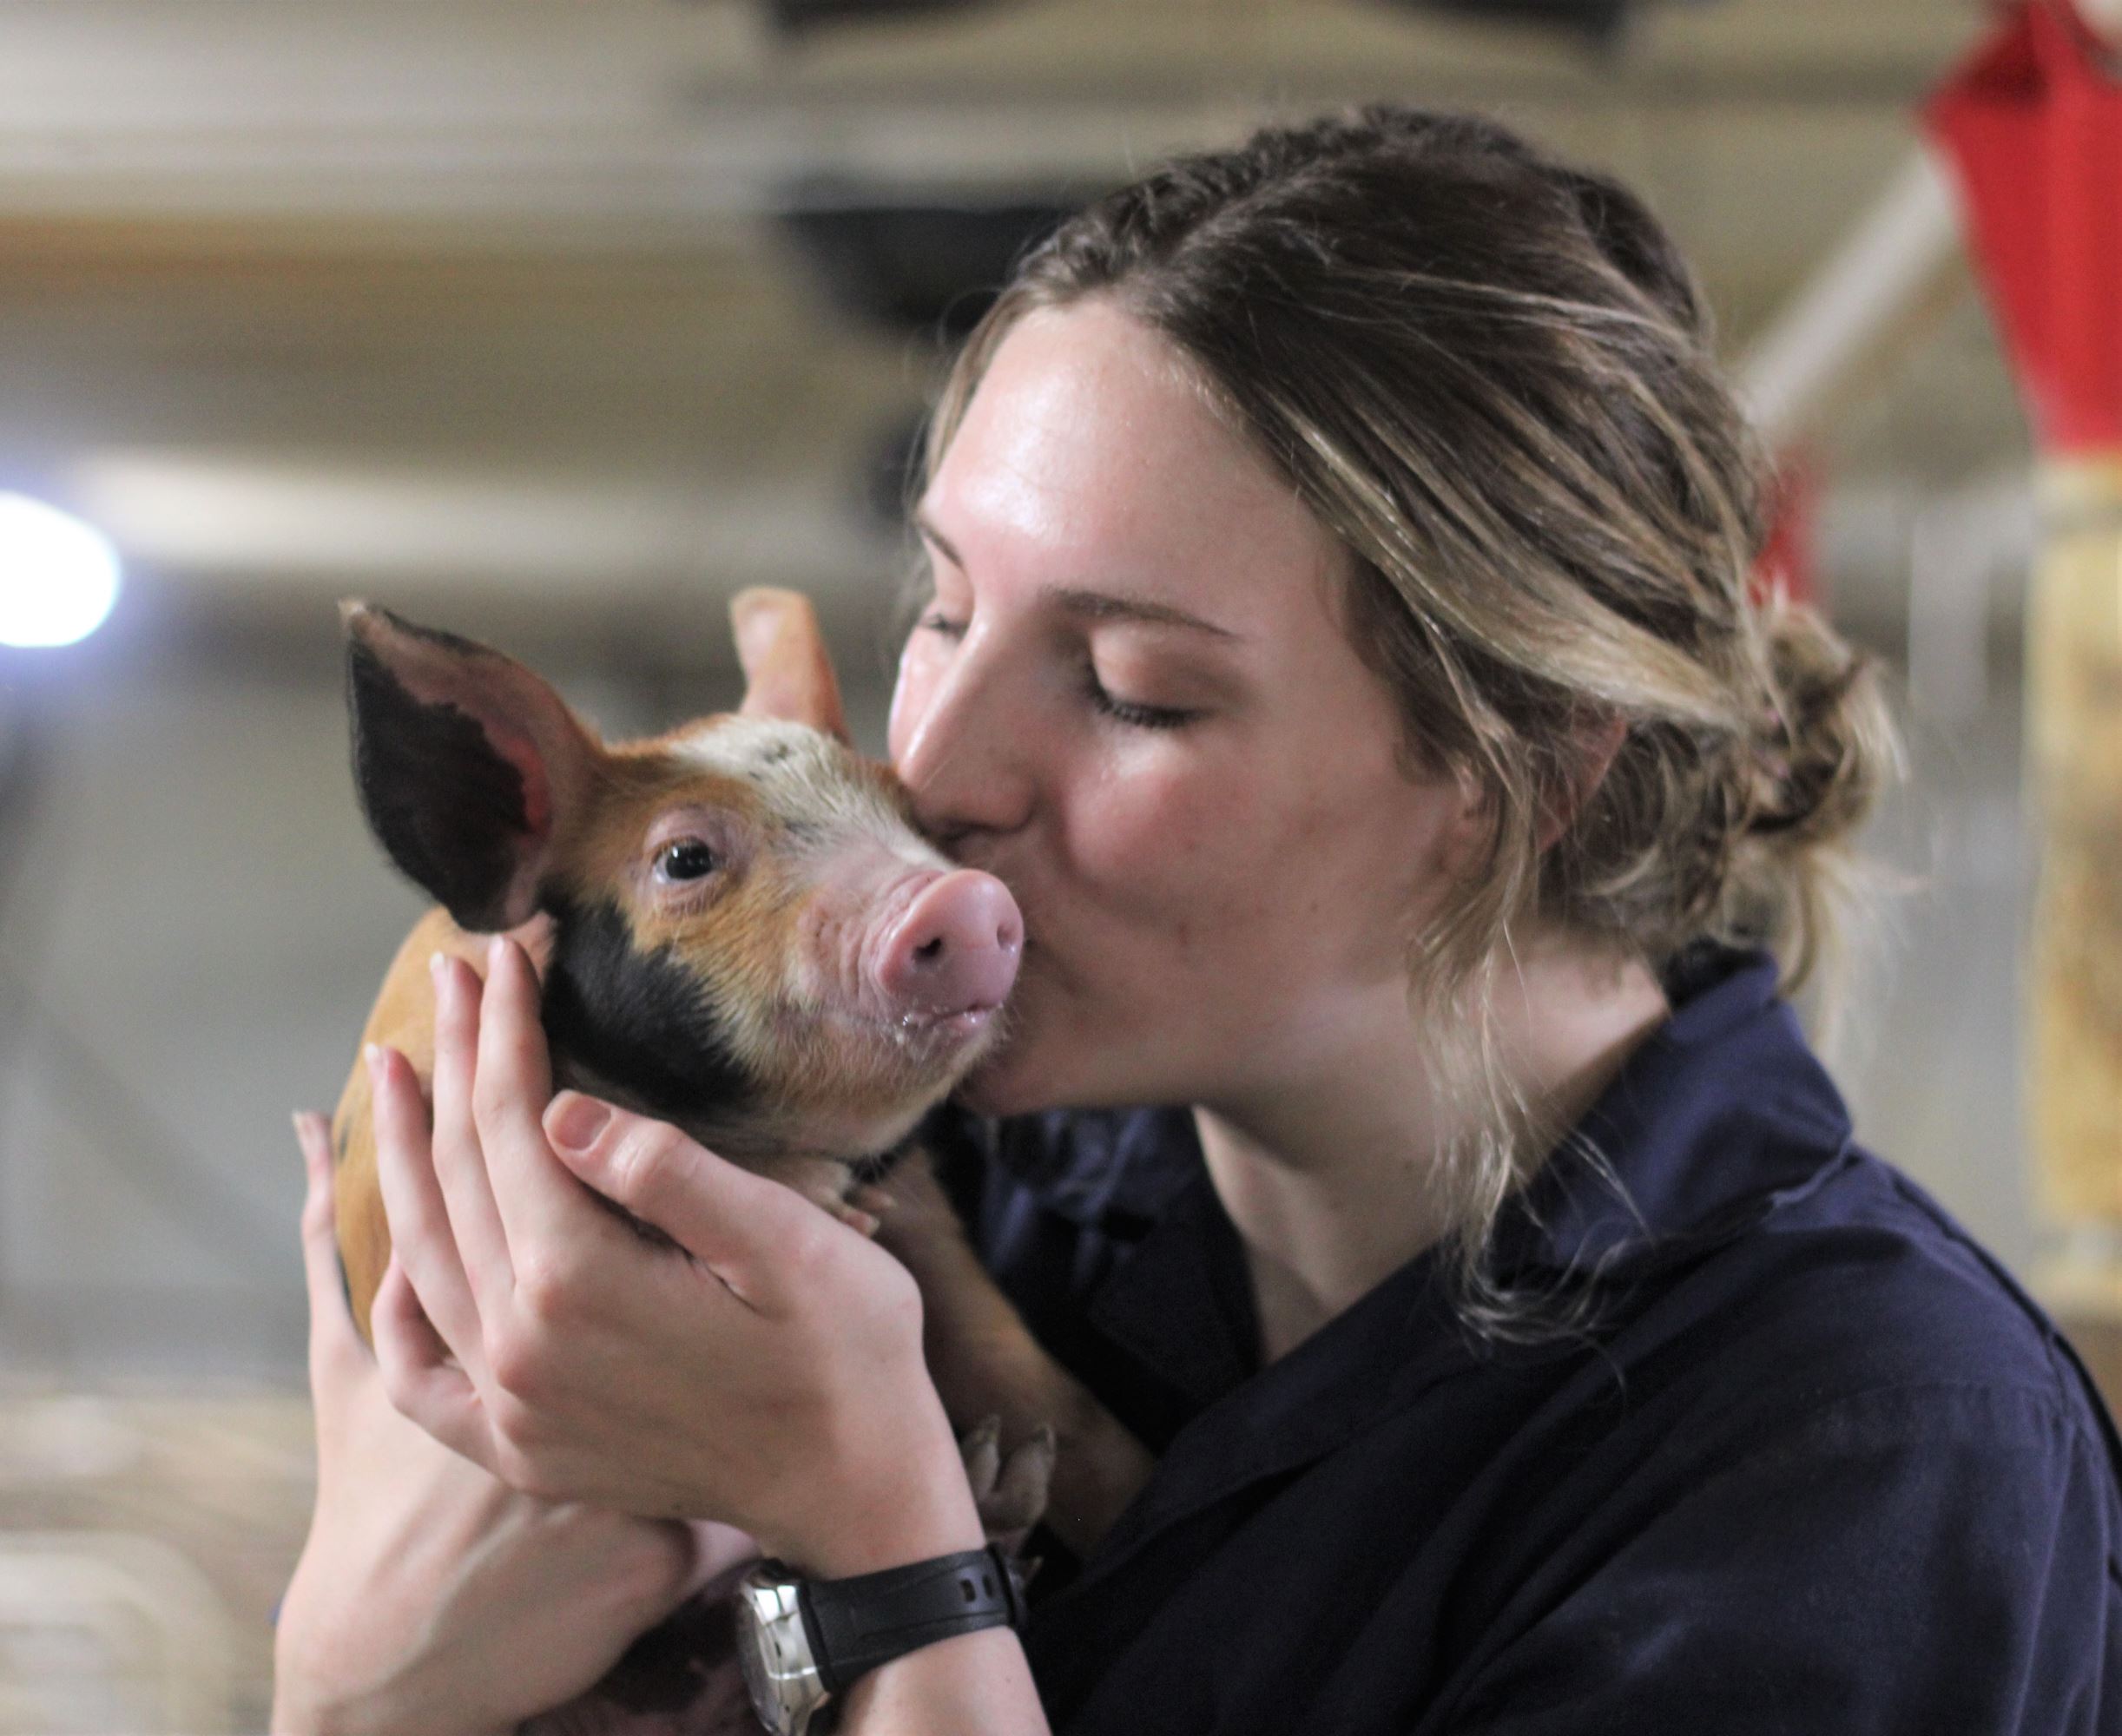 Lauren holds and kisses a baby pig.